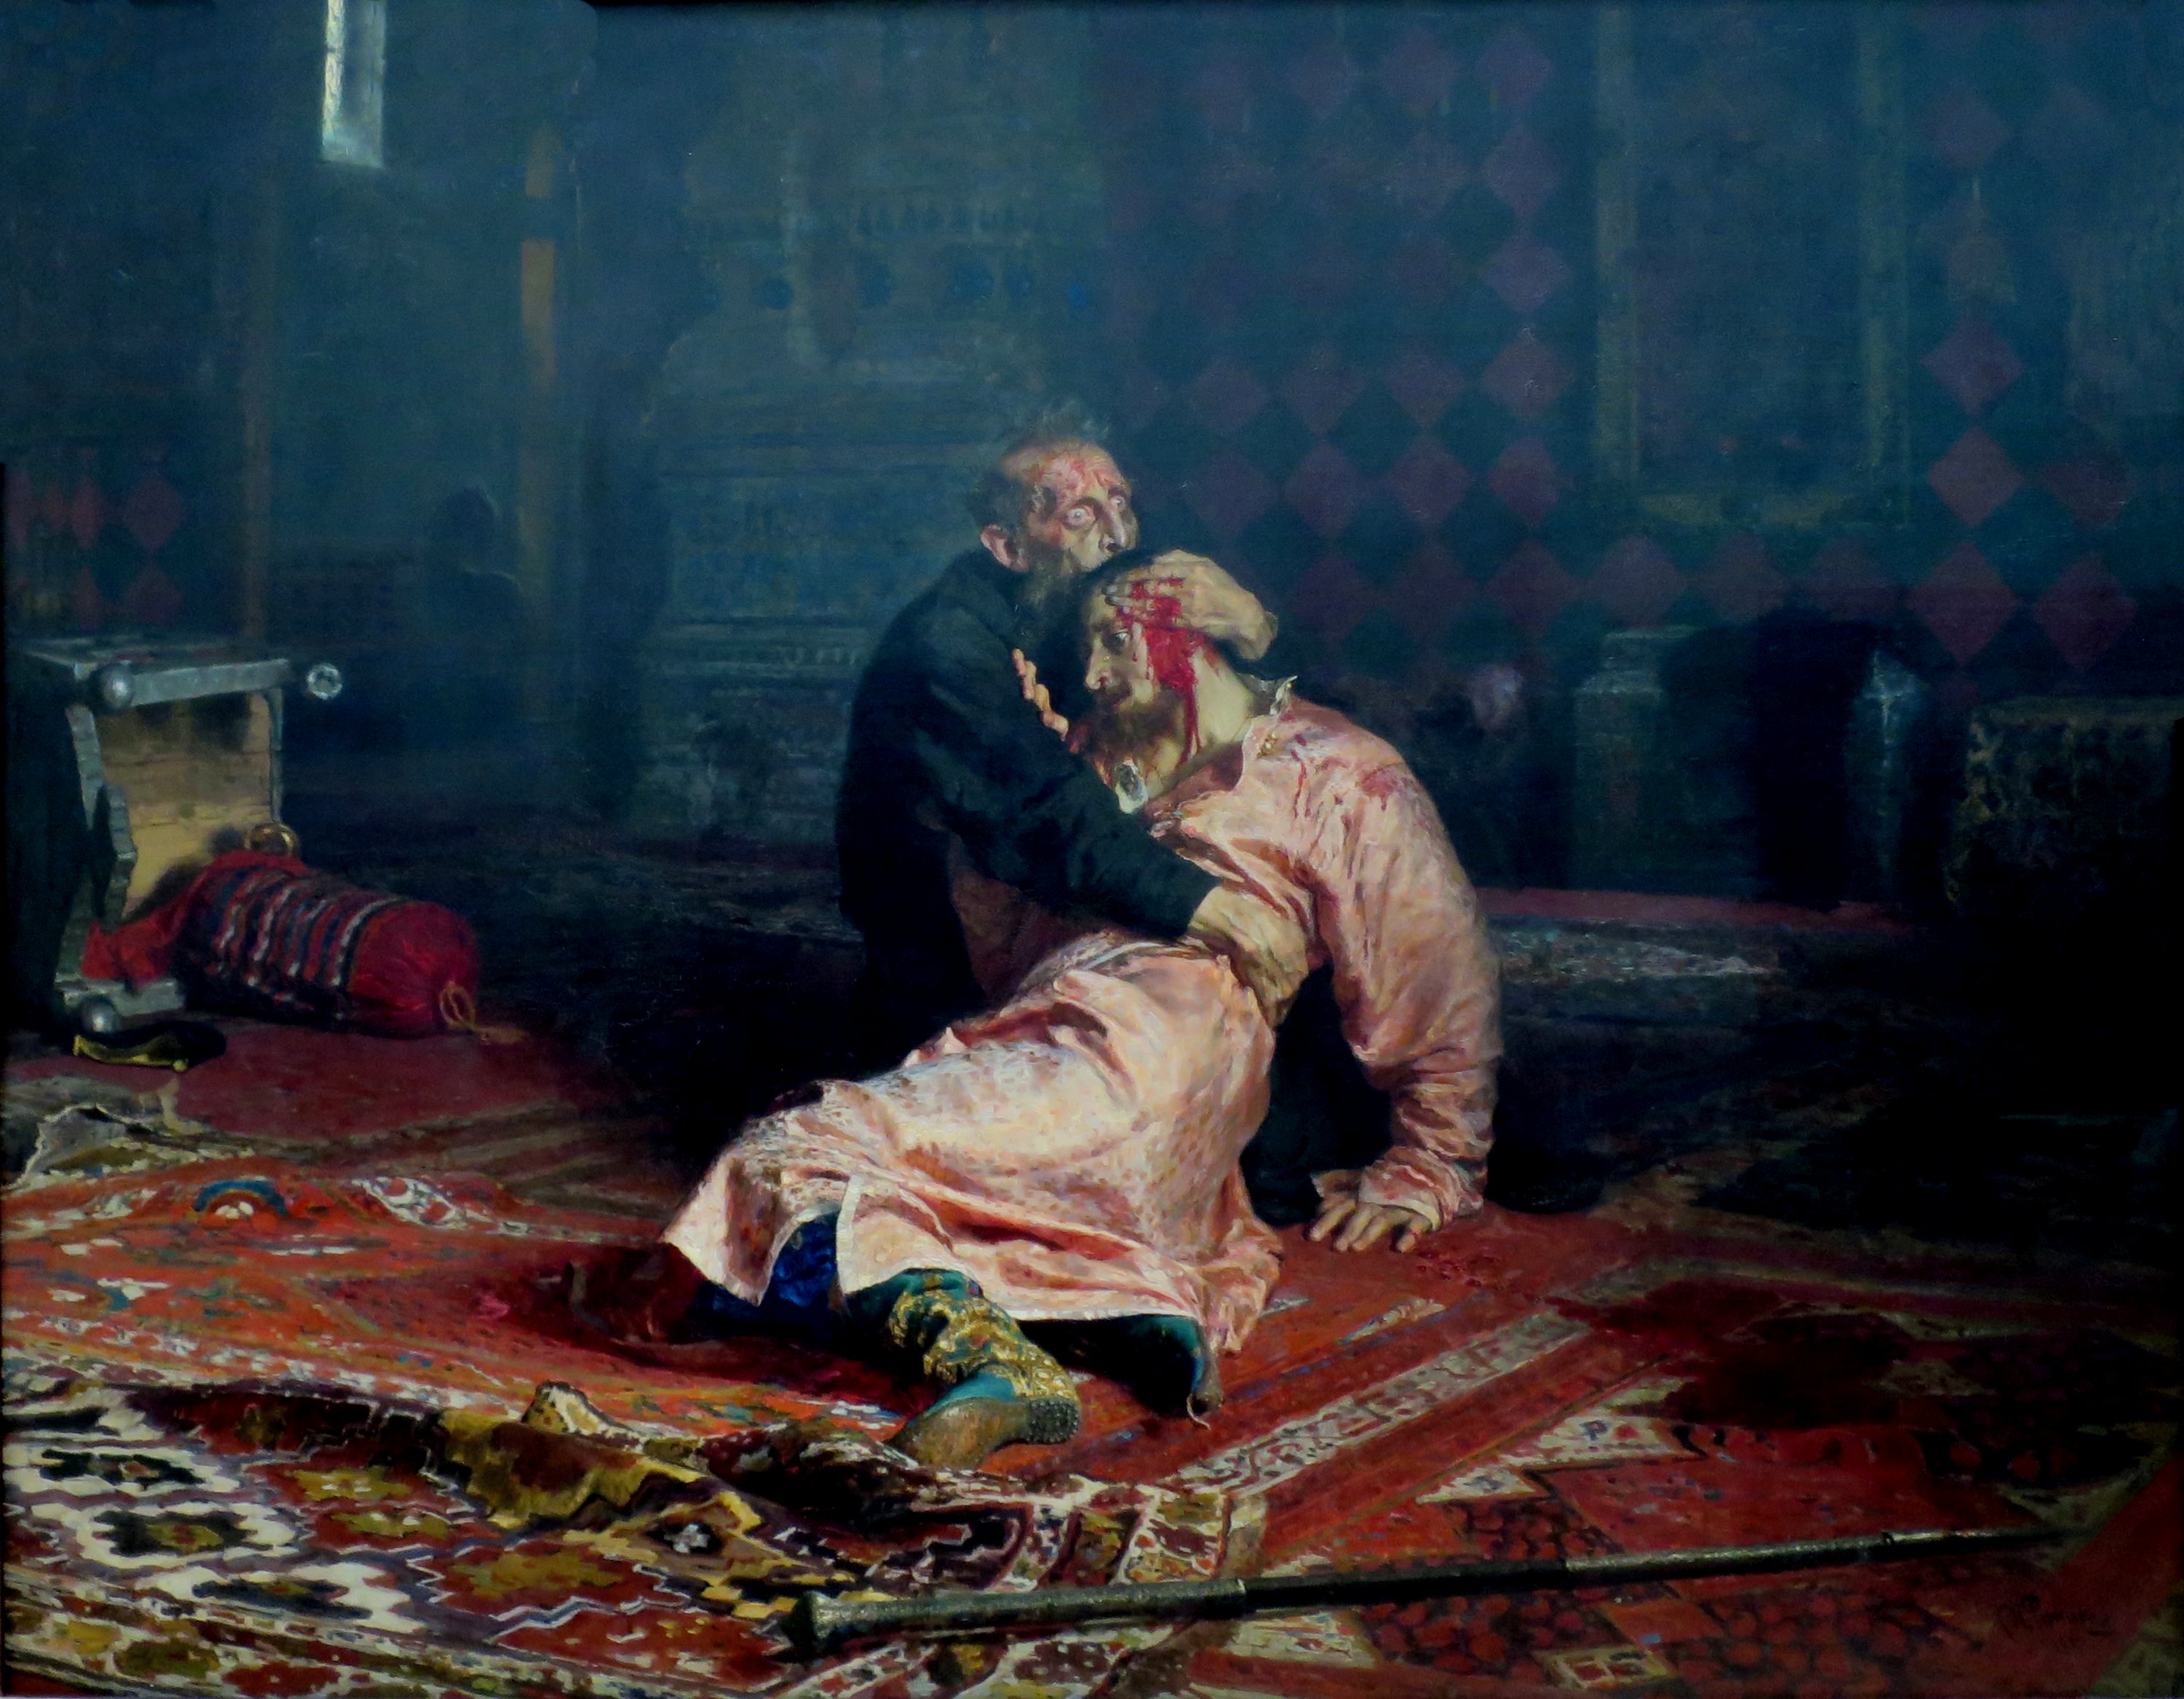 1581: Russian Tsar Ivan the Terrible Killed his own Son and Grandchild